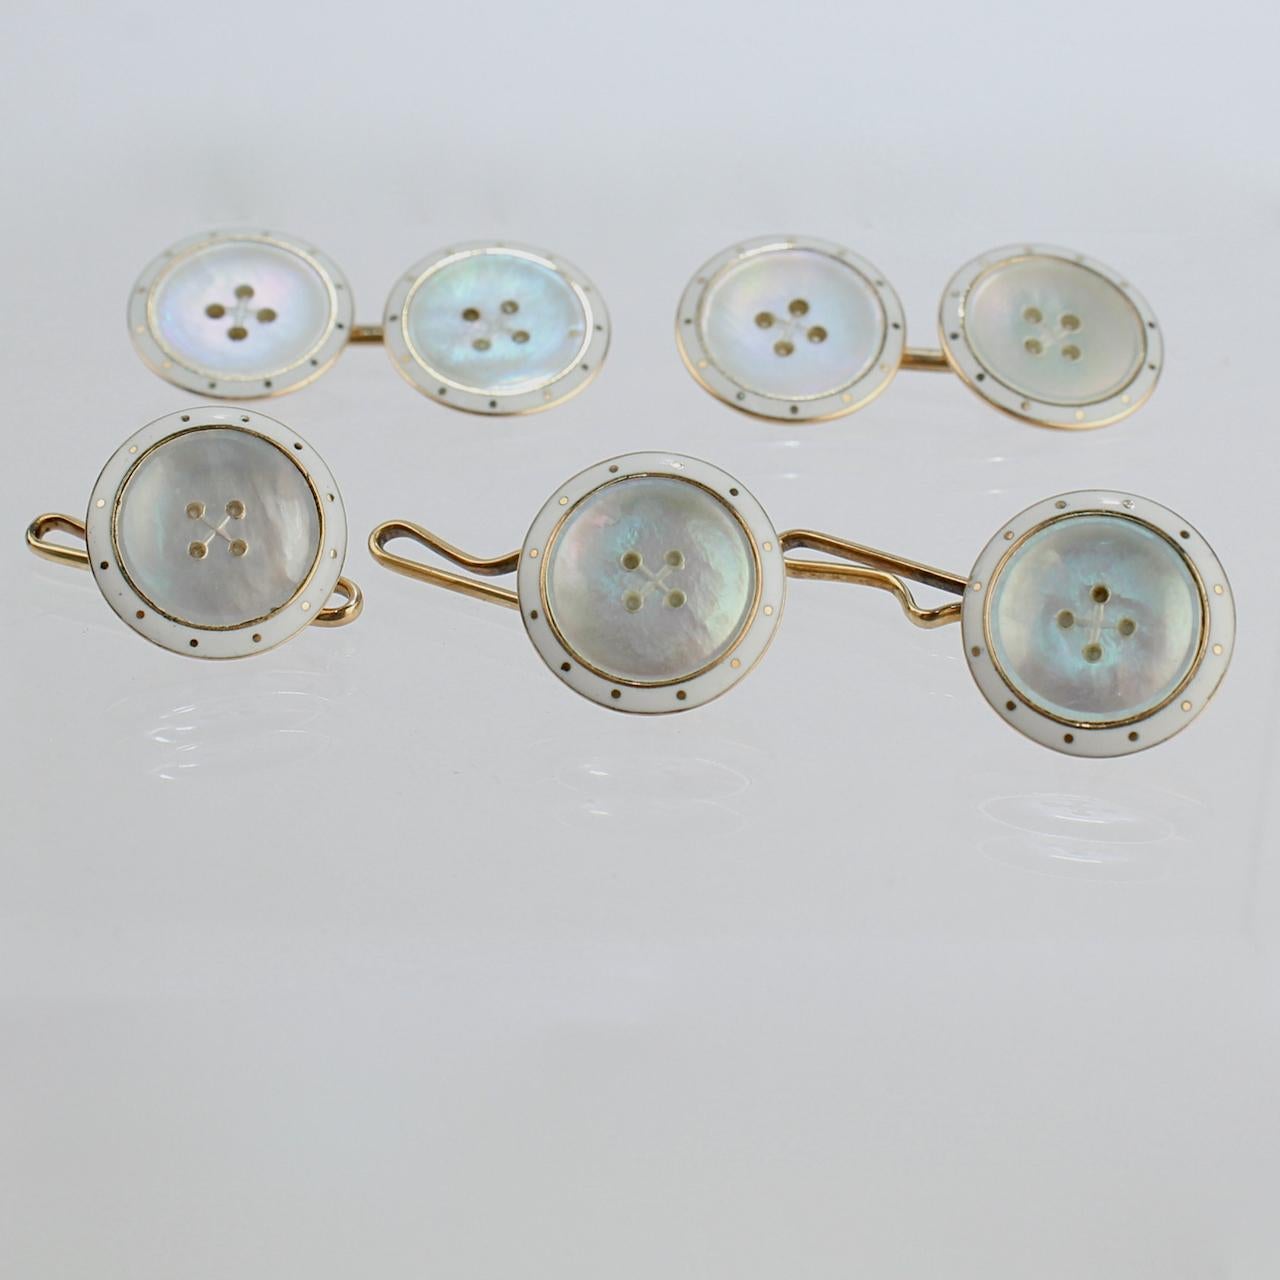 A very fine vintage Art Deco dress set.

Comprising a pair of cufflinks and three dress button in 14k yellow gold with mother of pearl and white enamel decoration.

Each decorated as faux buttons. 

Simply a terrific set for the smartly dressed